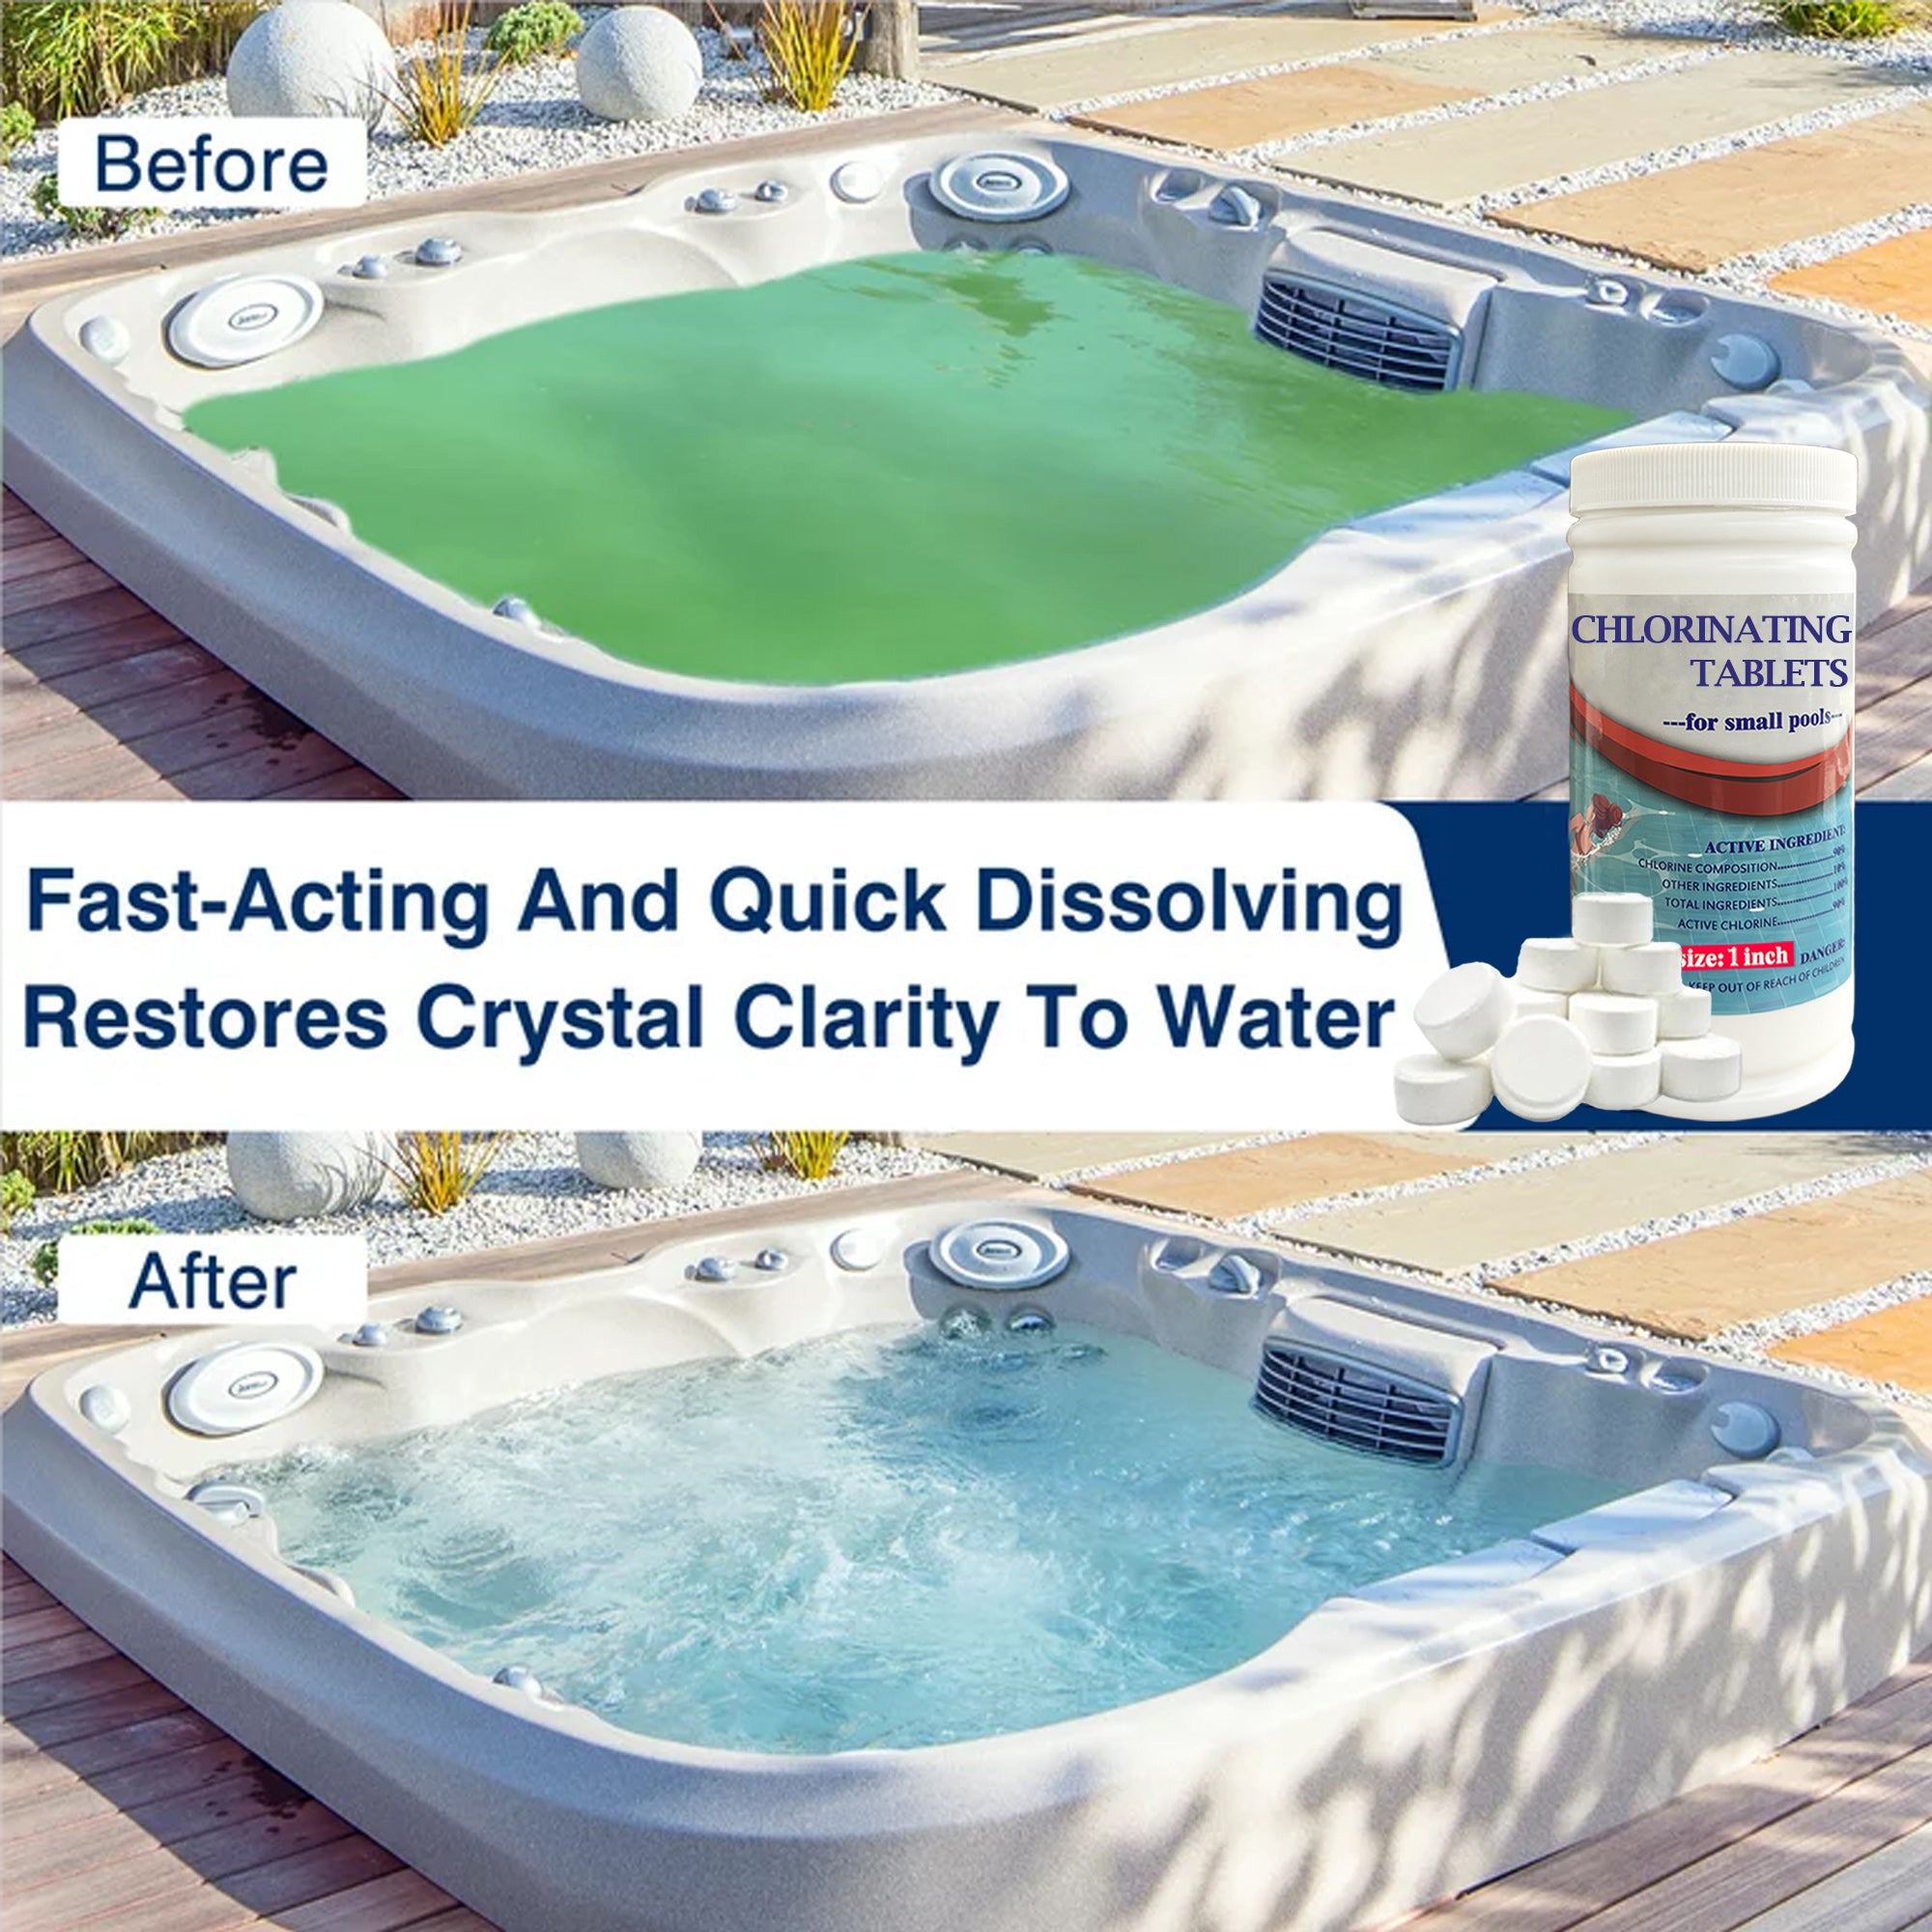 use-1-inch-chlorine-tablets-to-make-hottub-clean